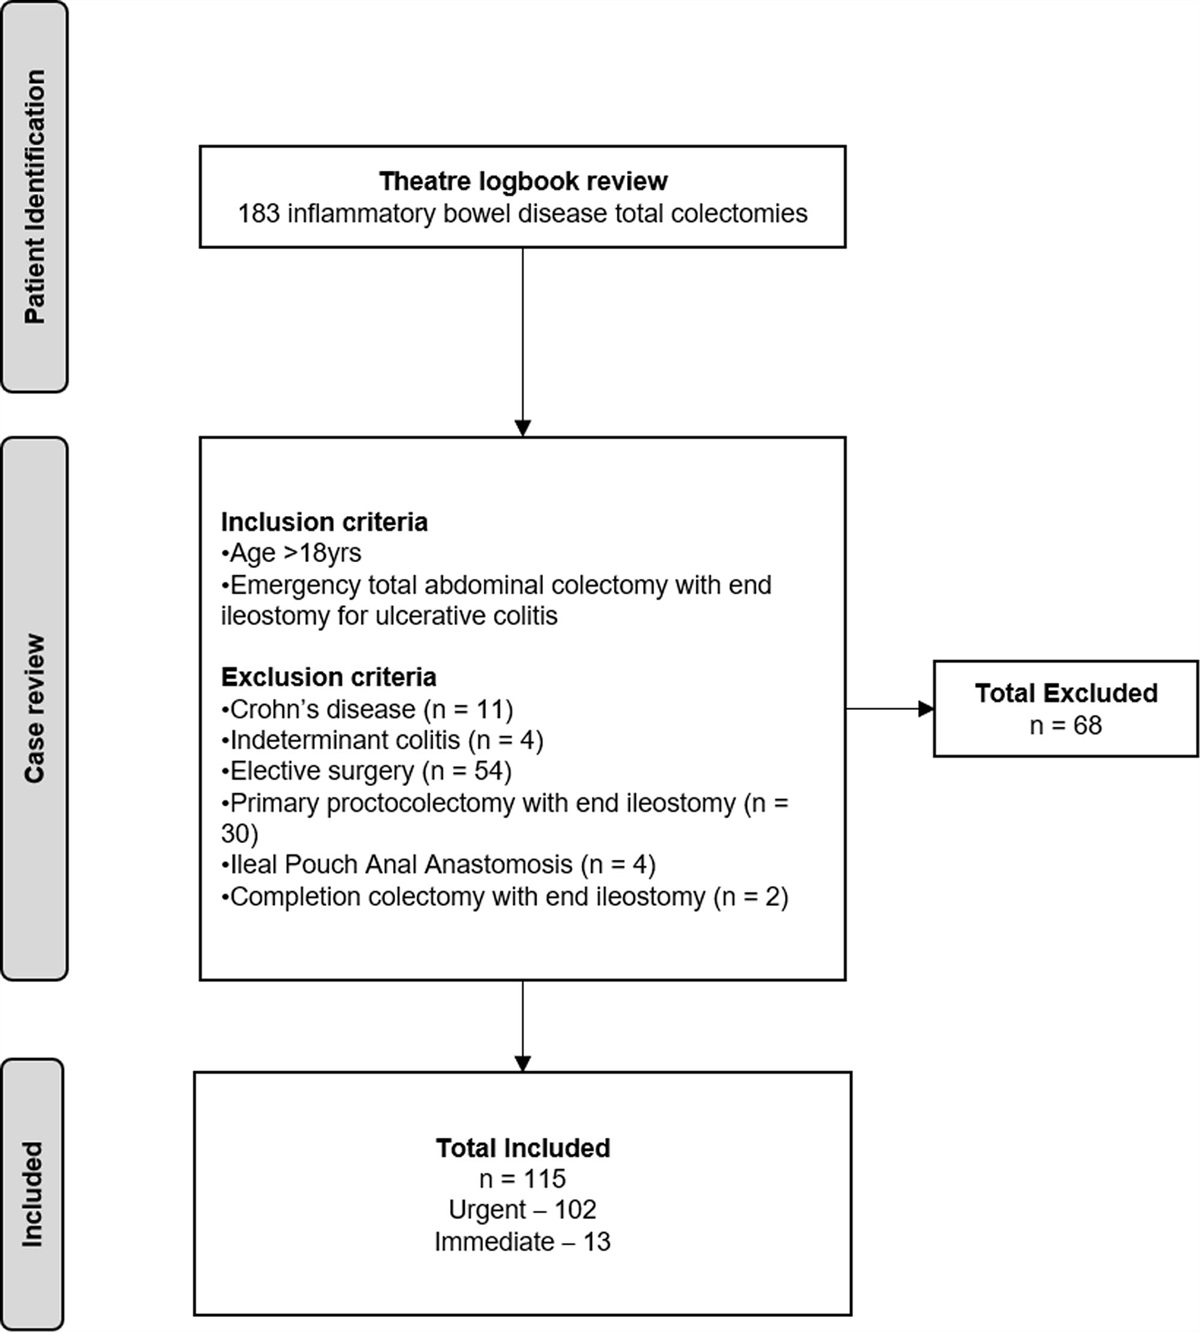 Contemporary perioperative outcomes after total abdominal colectomy for ulcerative colitis in a tertiary referral centre